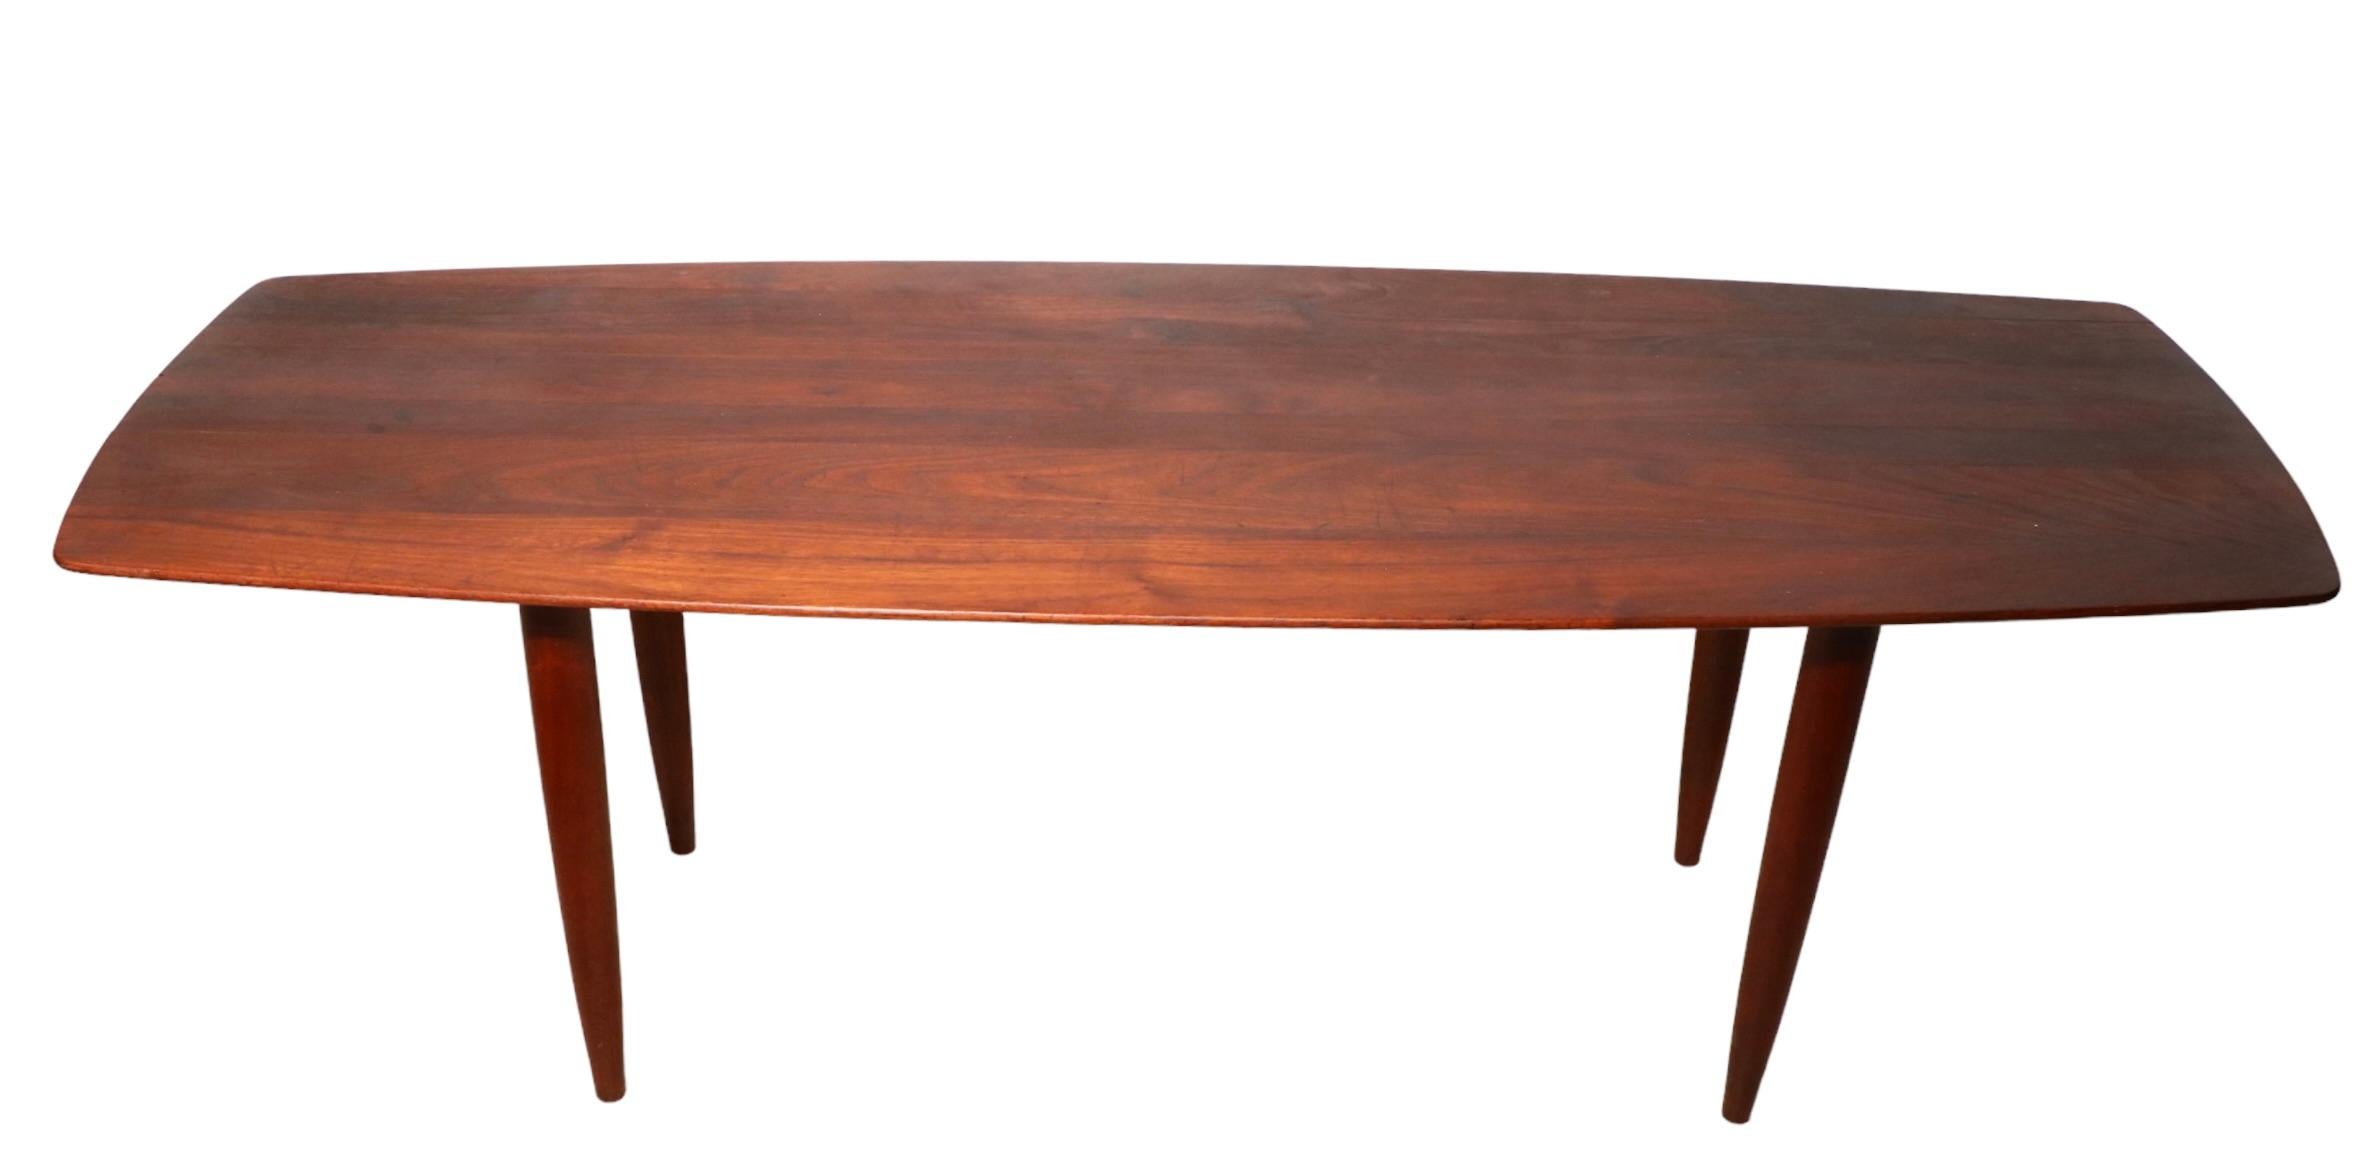 20th Century Mid Century Coffee Table Prelude by Ace Hi, c. 1950/1960's For Sale